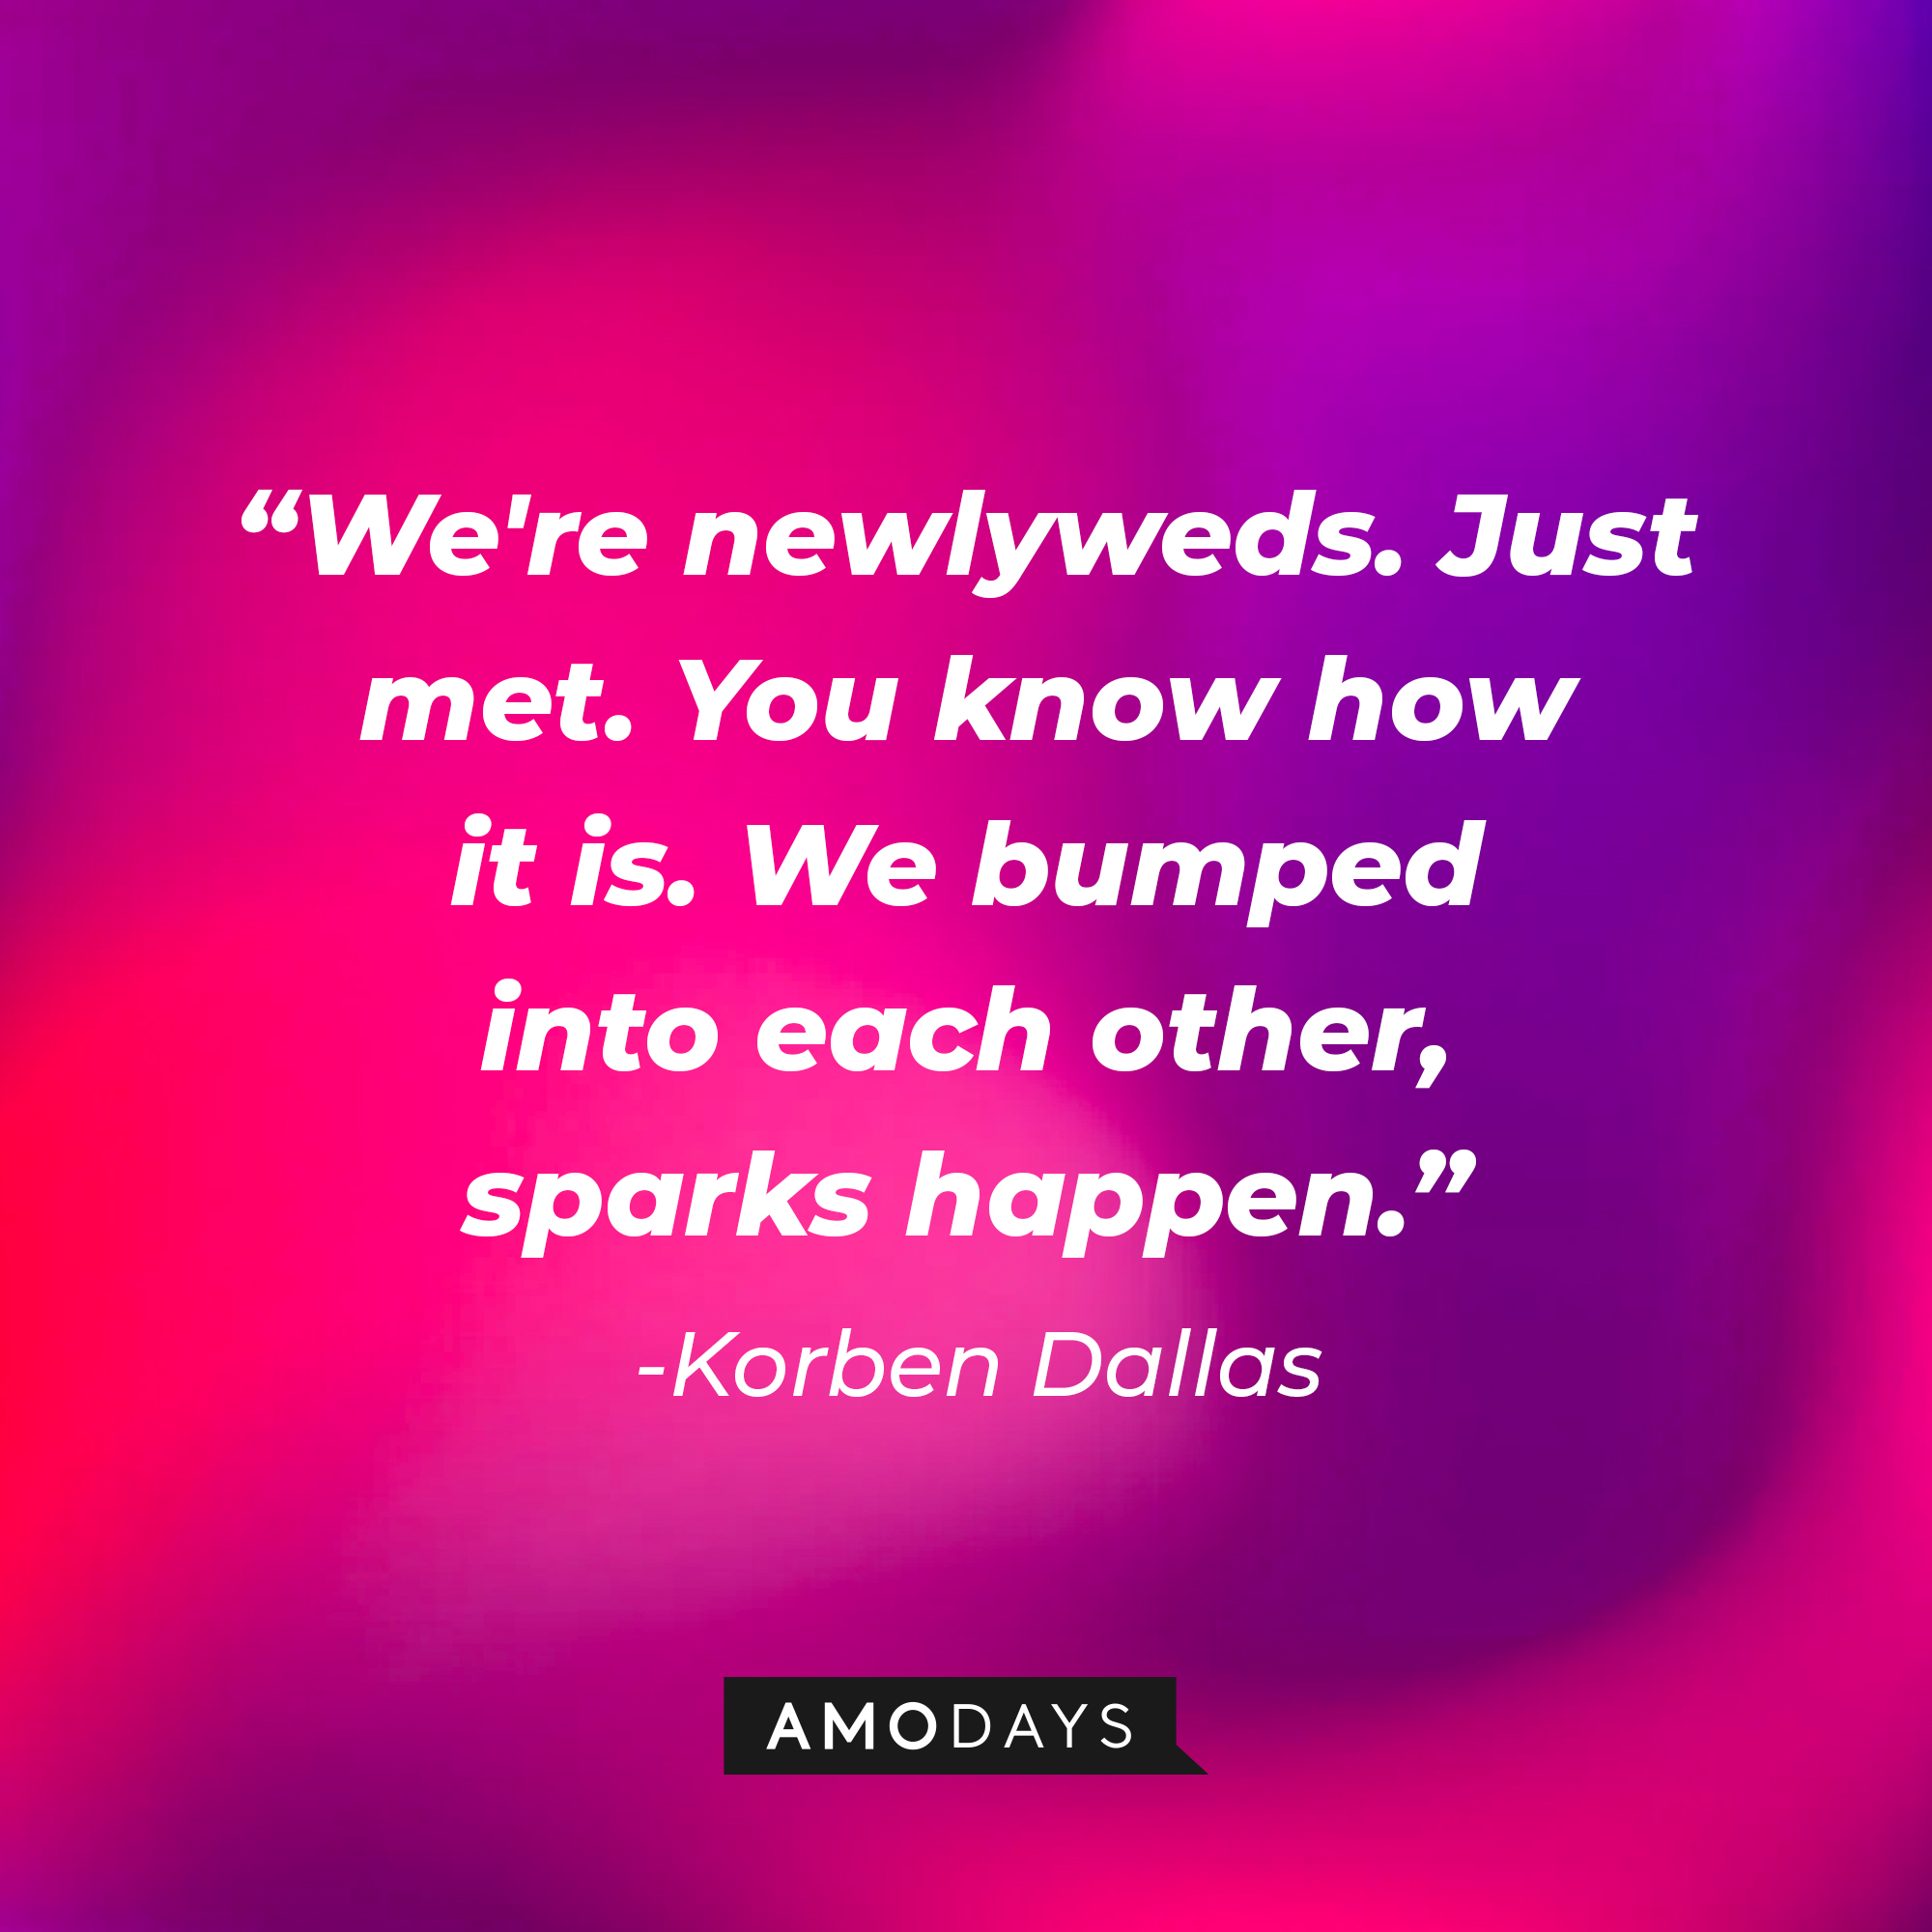 Korben Dallas' quote: "We're newlyweds. Just met. You know how it is. We bumped into each other, sparks happen" | Source: Amodays